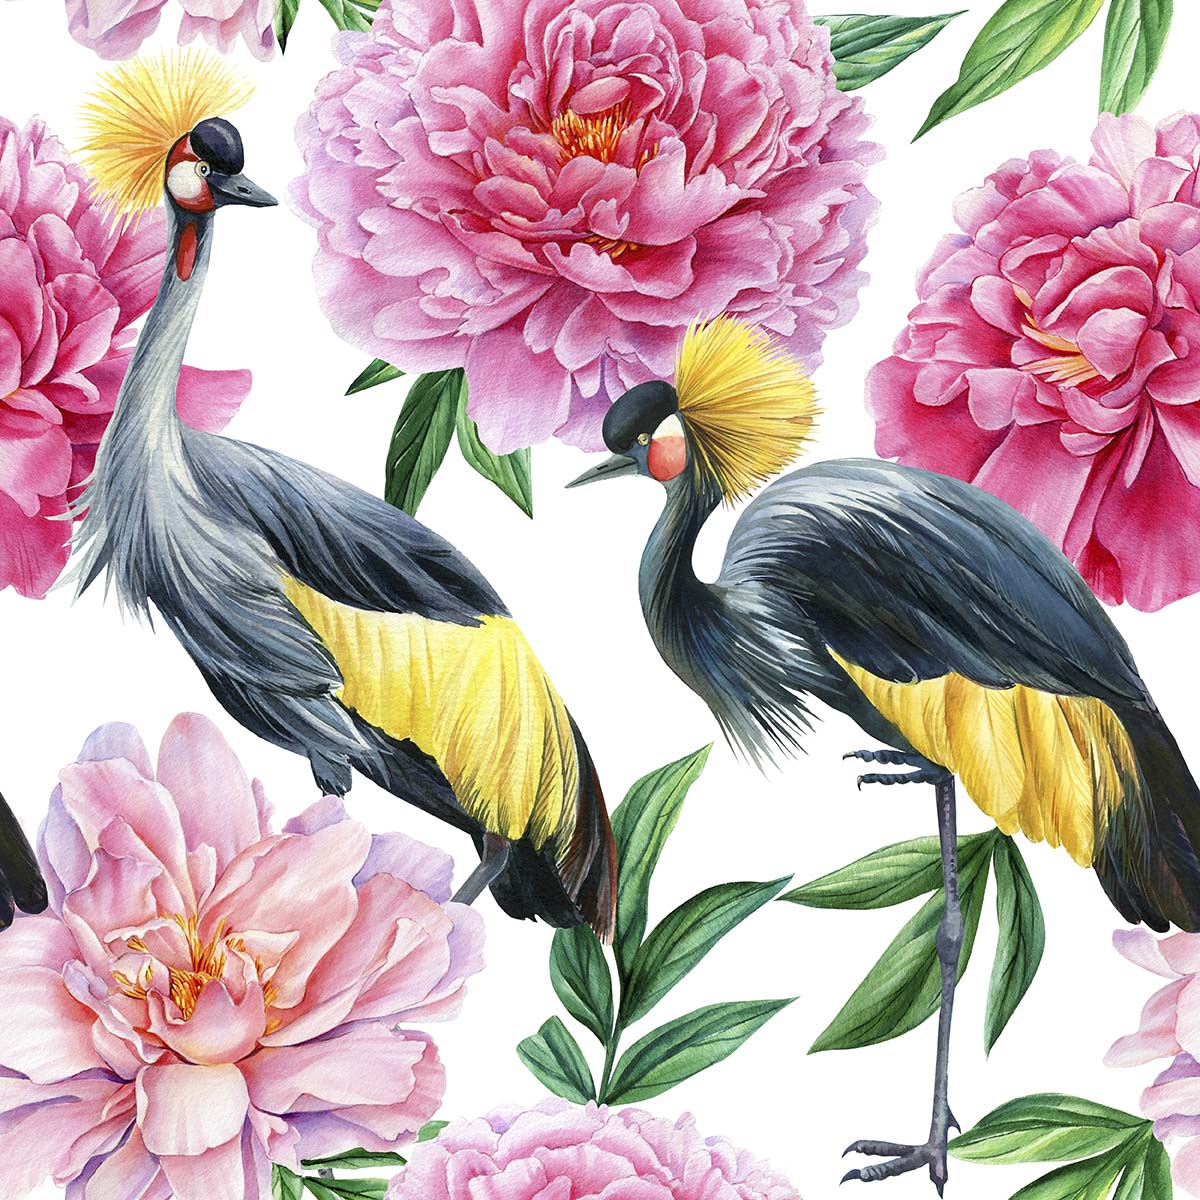 A group of birds and flowers